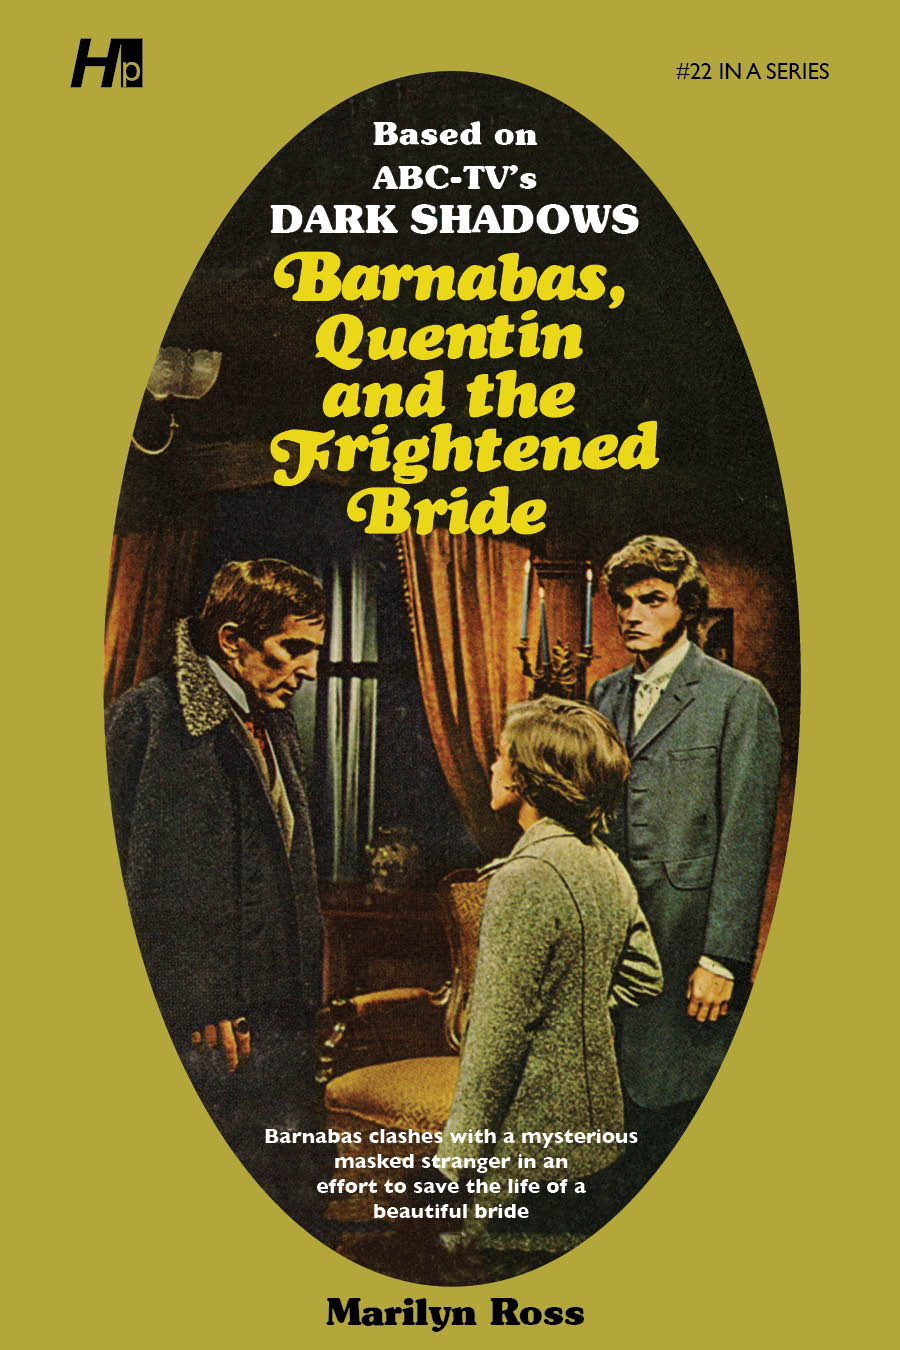 Dark Shadows #22: Barnabas, Quentin and the Frightened Bride [Paperback]